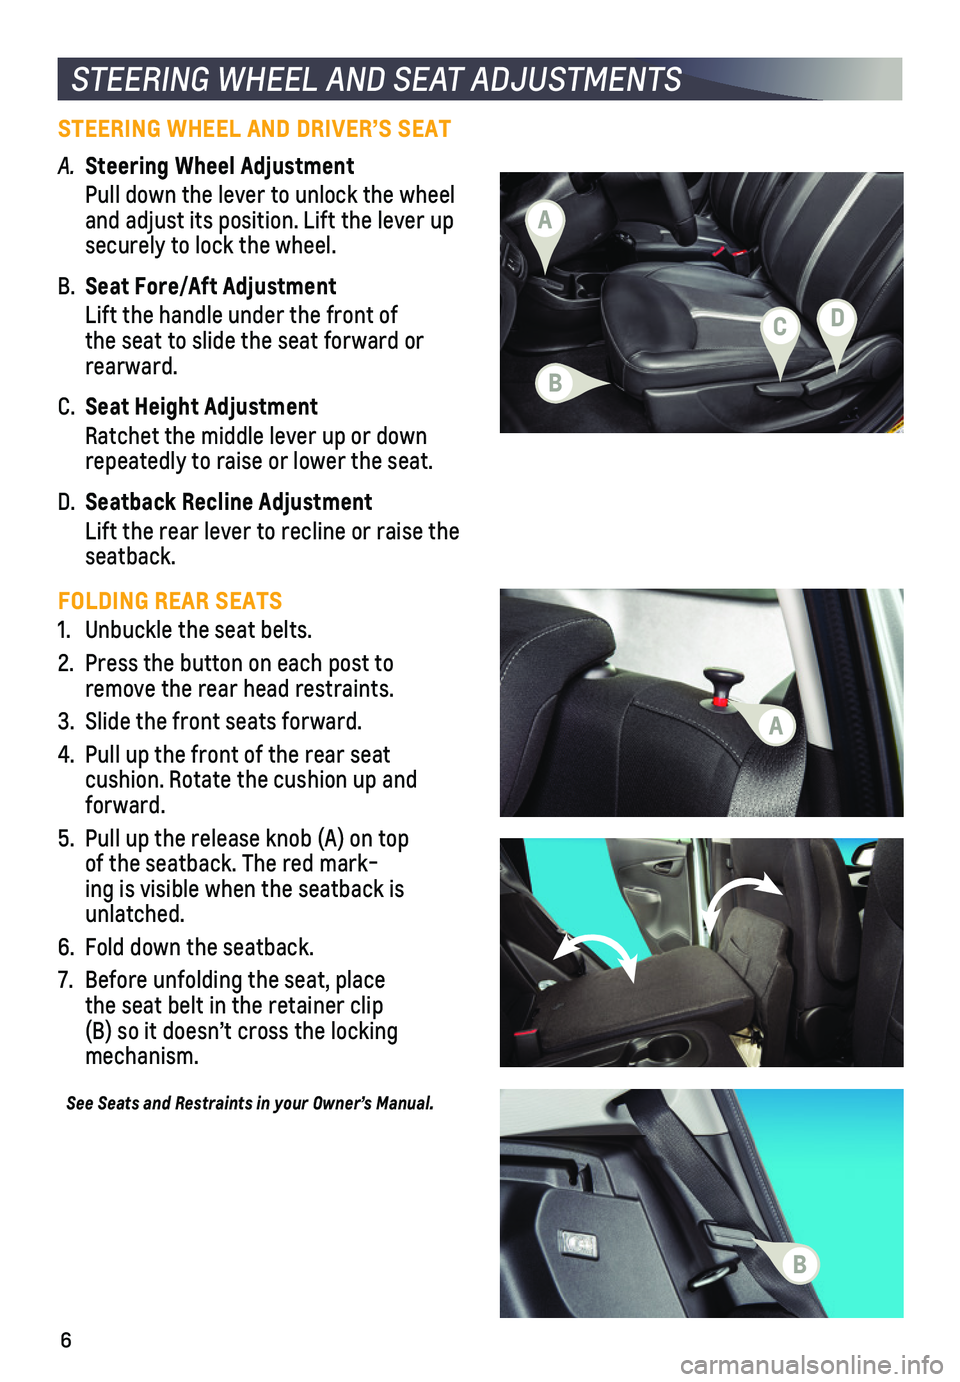 CHEVROLET SPARK 2019  Get To Know Guide 6
STEERING WHEEL AND SEAT ADJUSTMENTS
STEERING WHEEL AND DRIVER’S SEAT 
A. Steering Wheel Adjustment
  Pull down the lever to unlock the wheel and adjust its position. Lift the lever up securely t